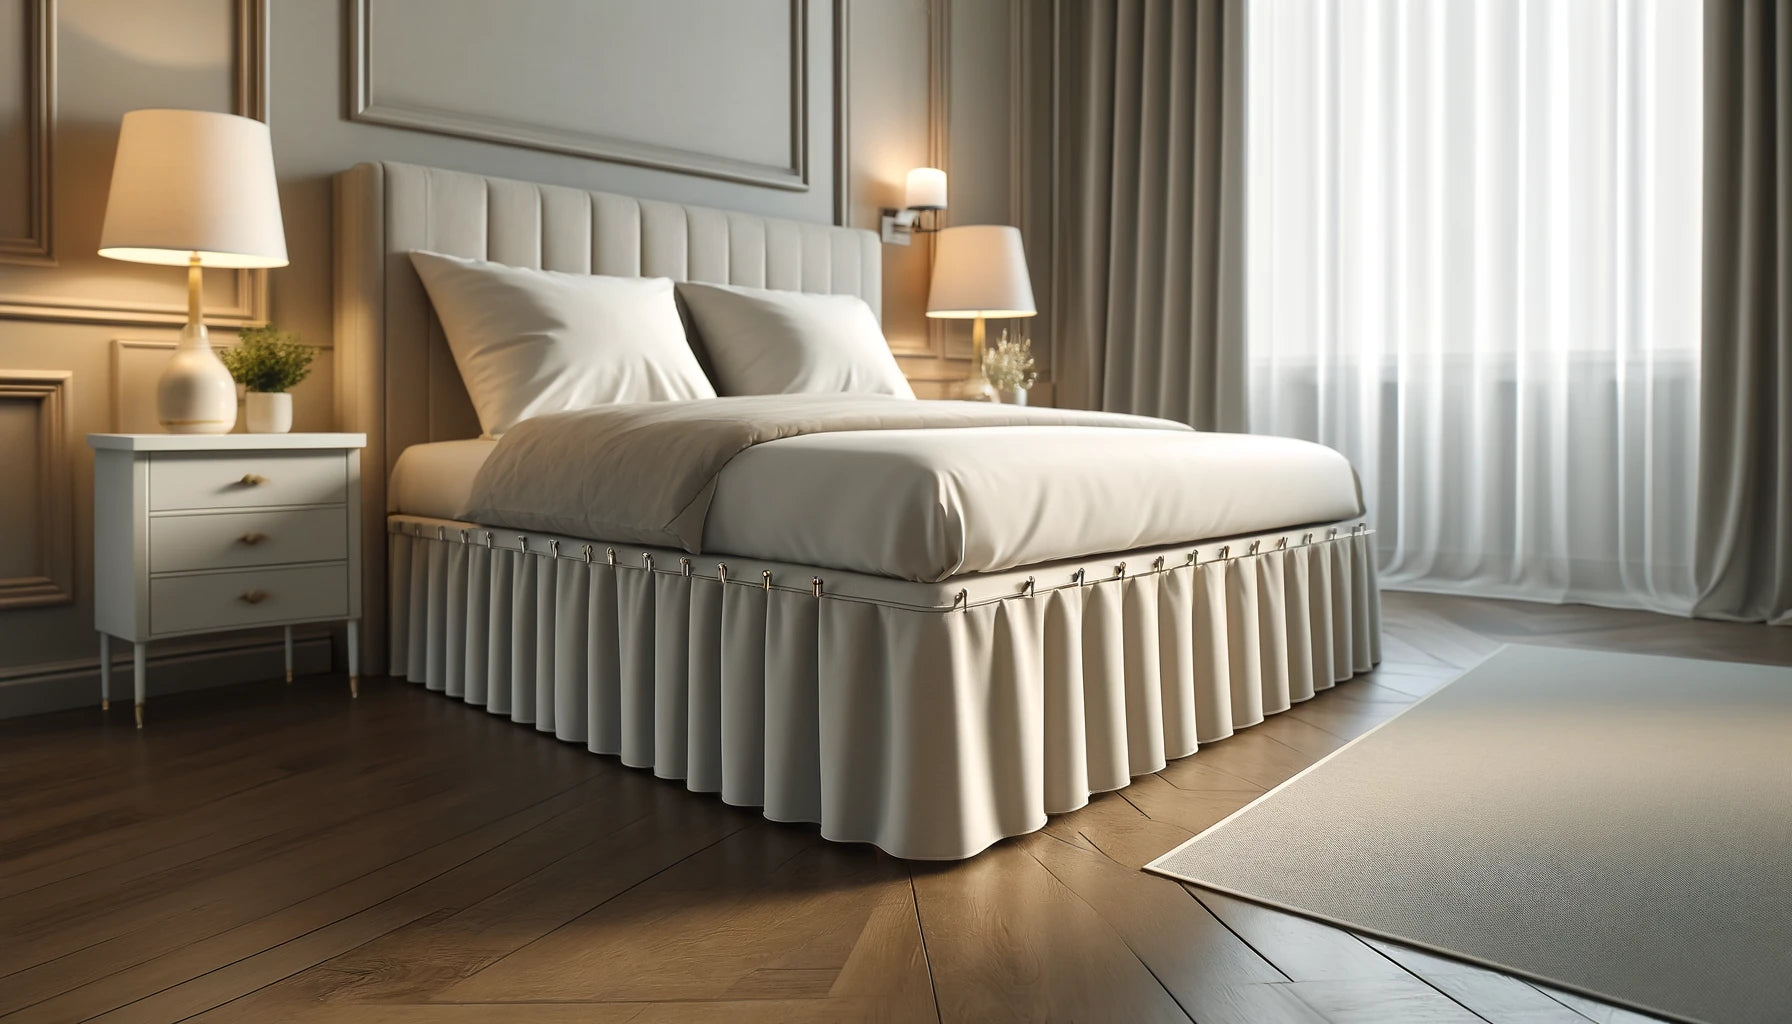 How to Use Bed Skirt Pins: Simple Steps to a Neat Bedroom